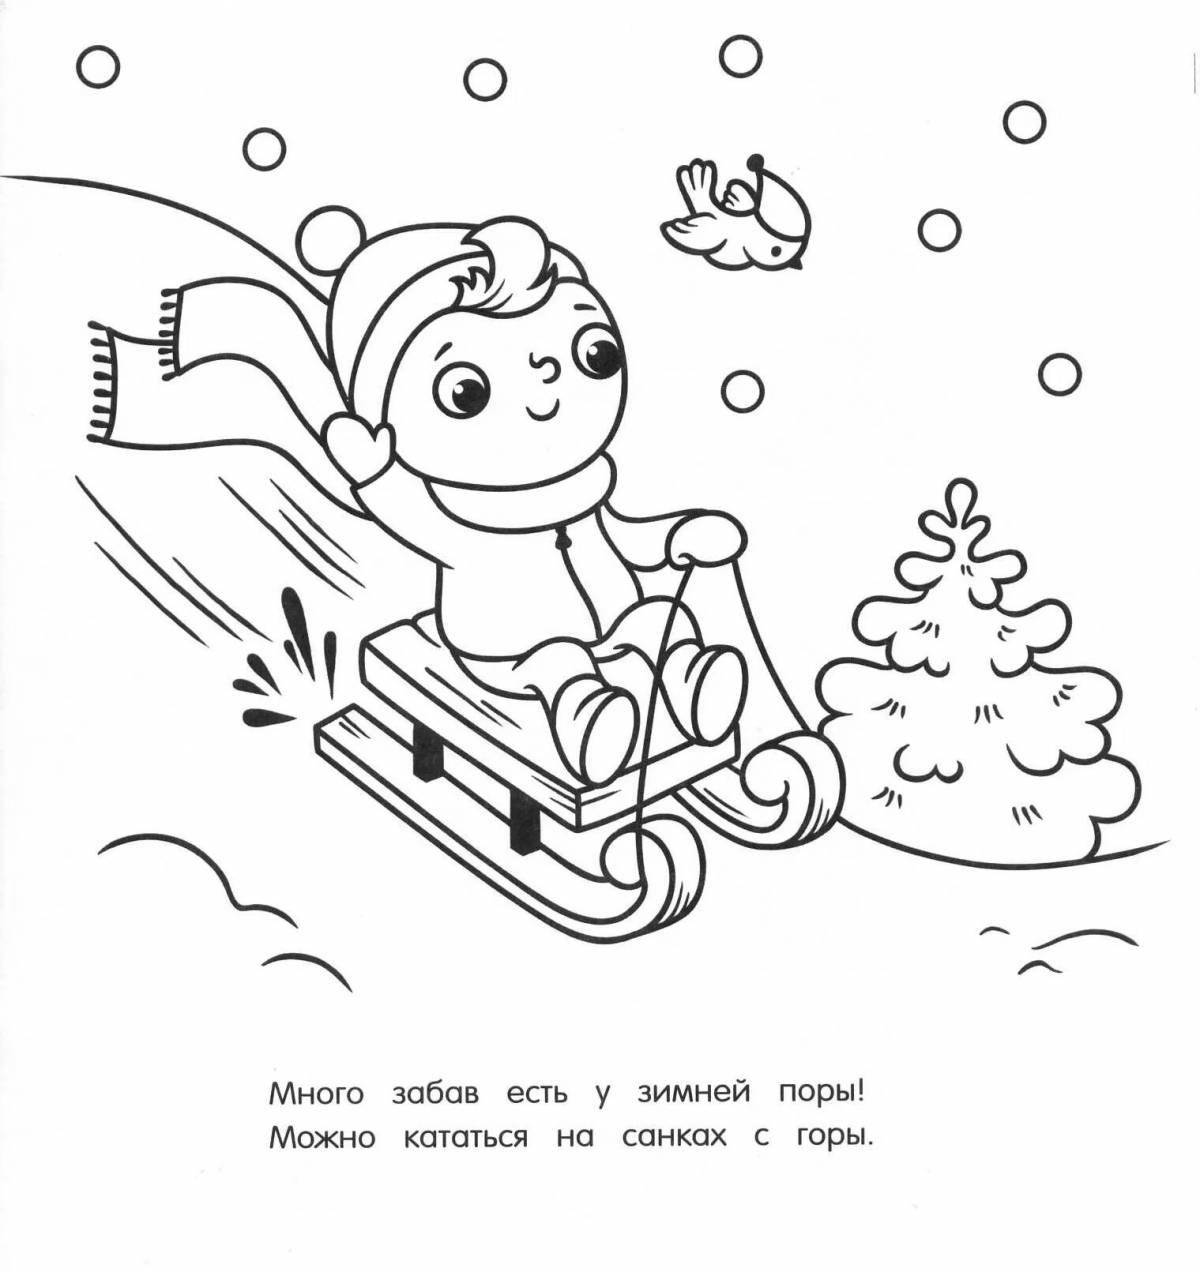 Coloring book humorous boy on a sled